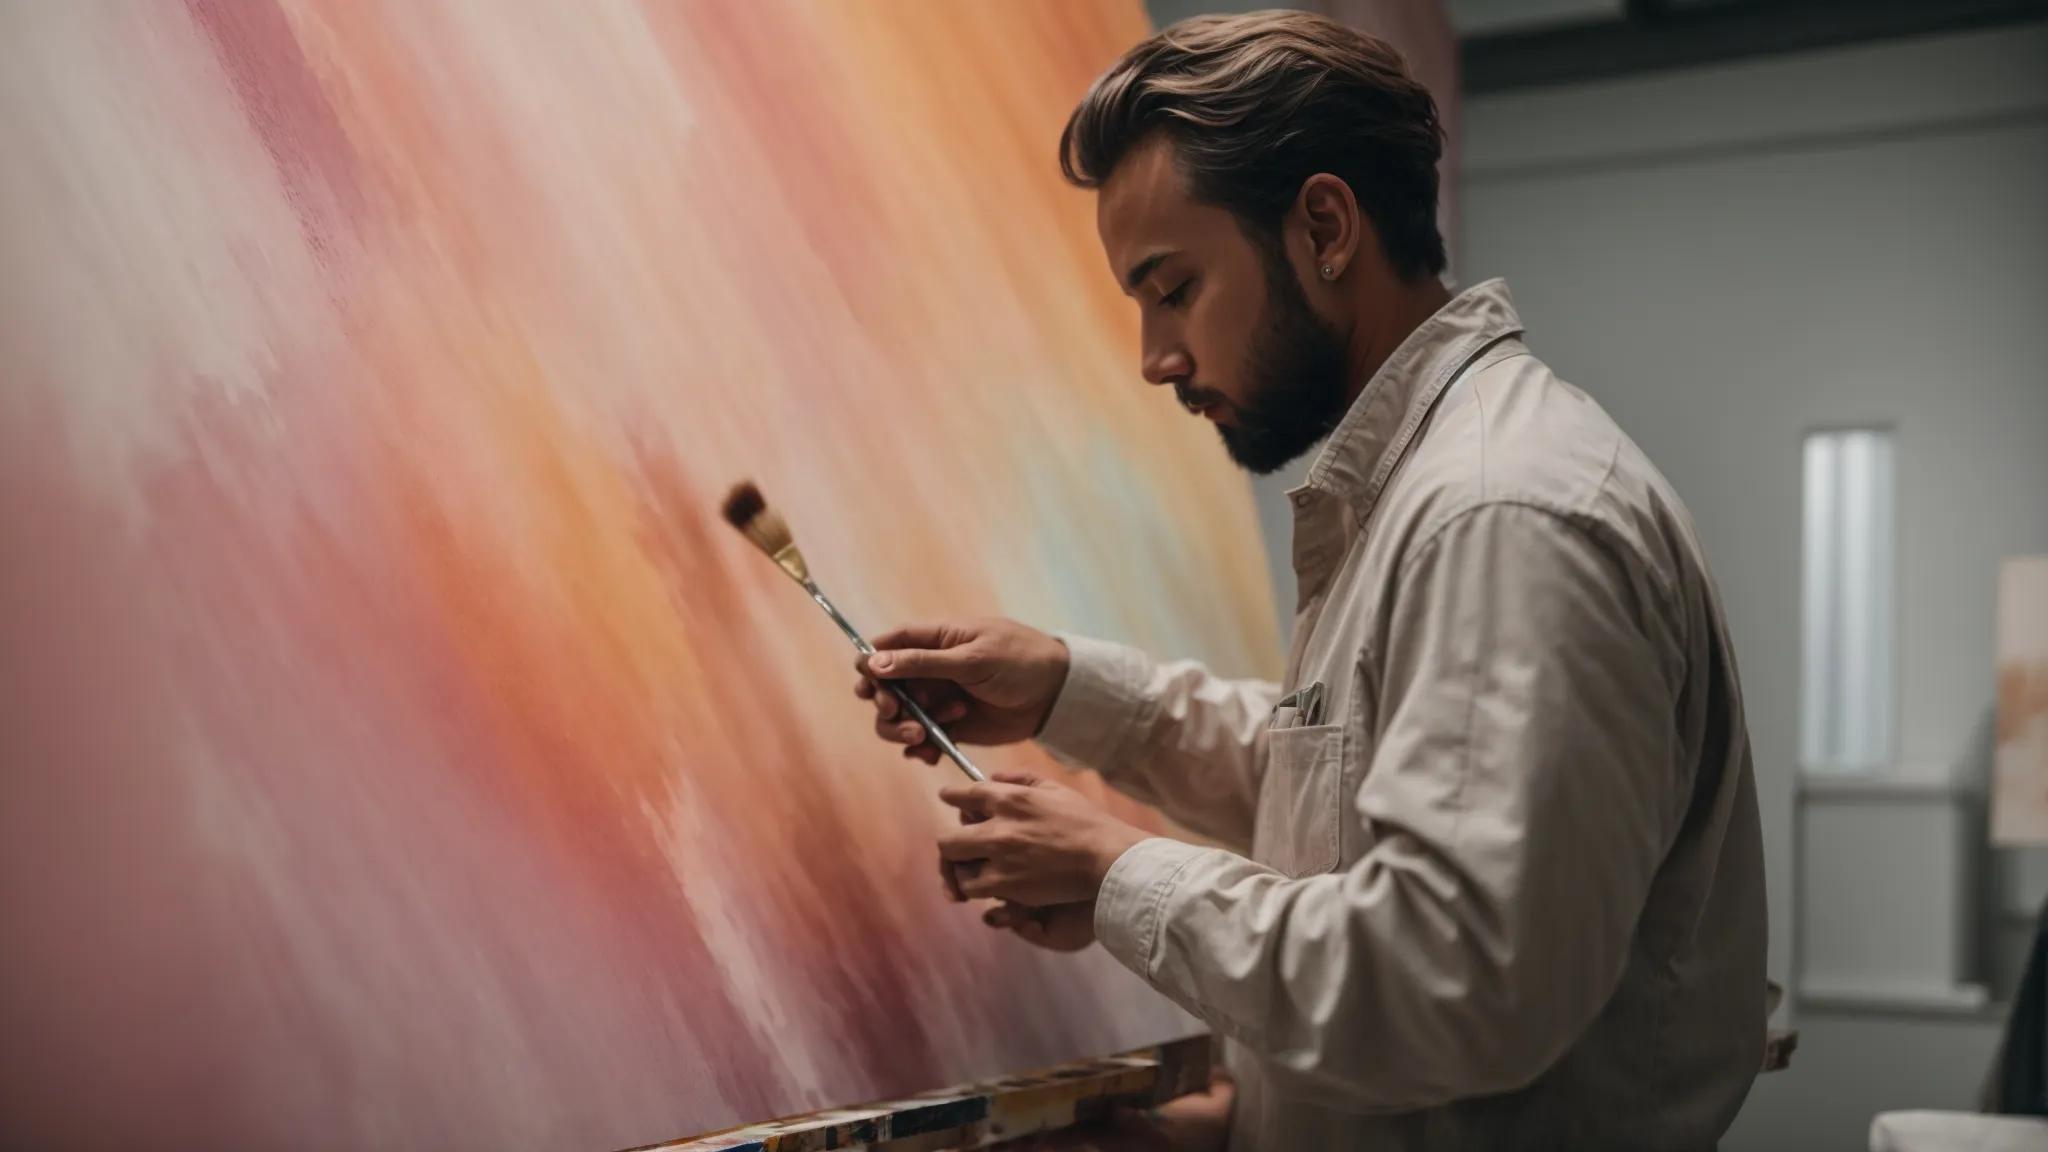 a painter thoughtfully blending a new hue onto a vast, evolving canvas.